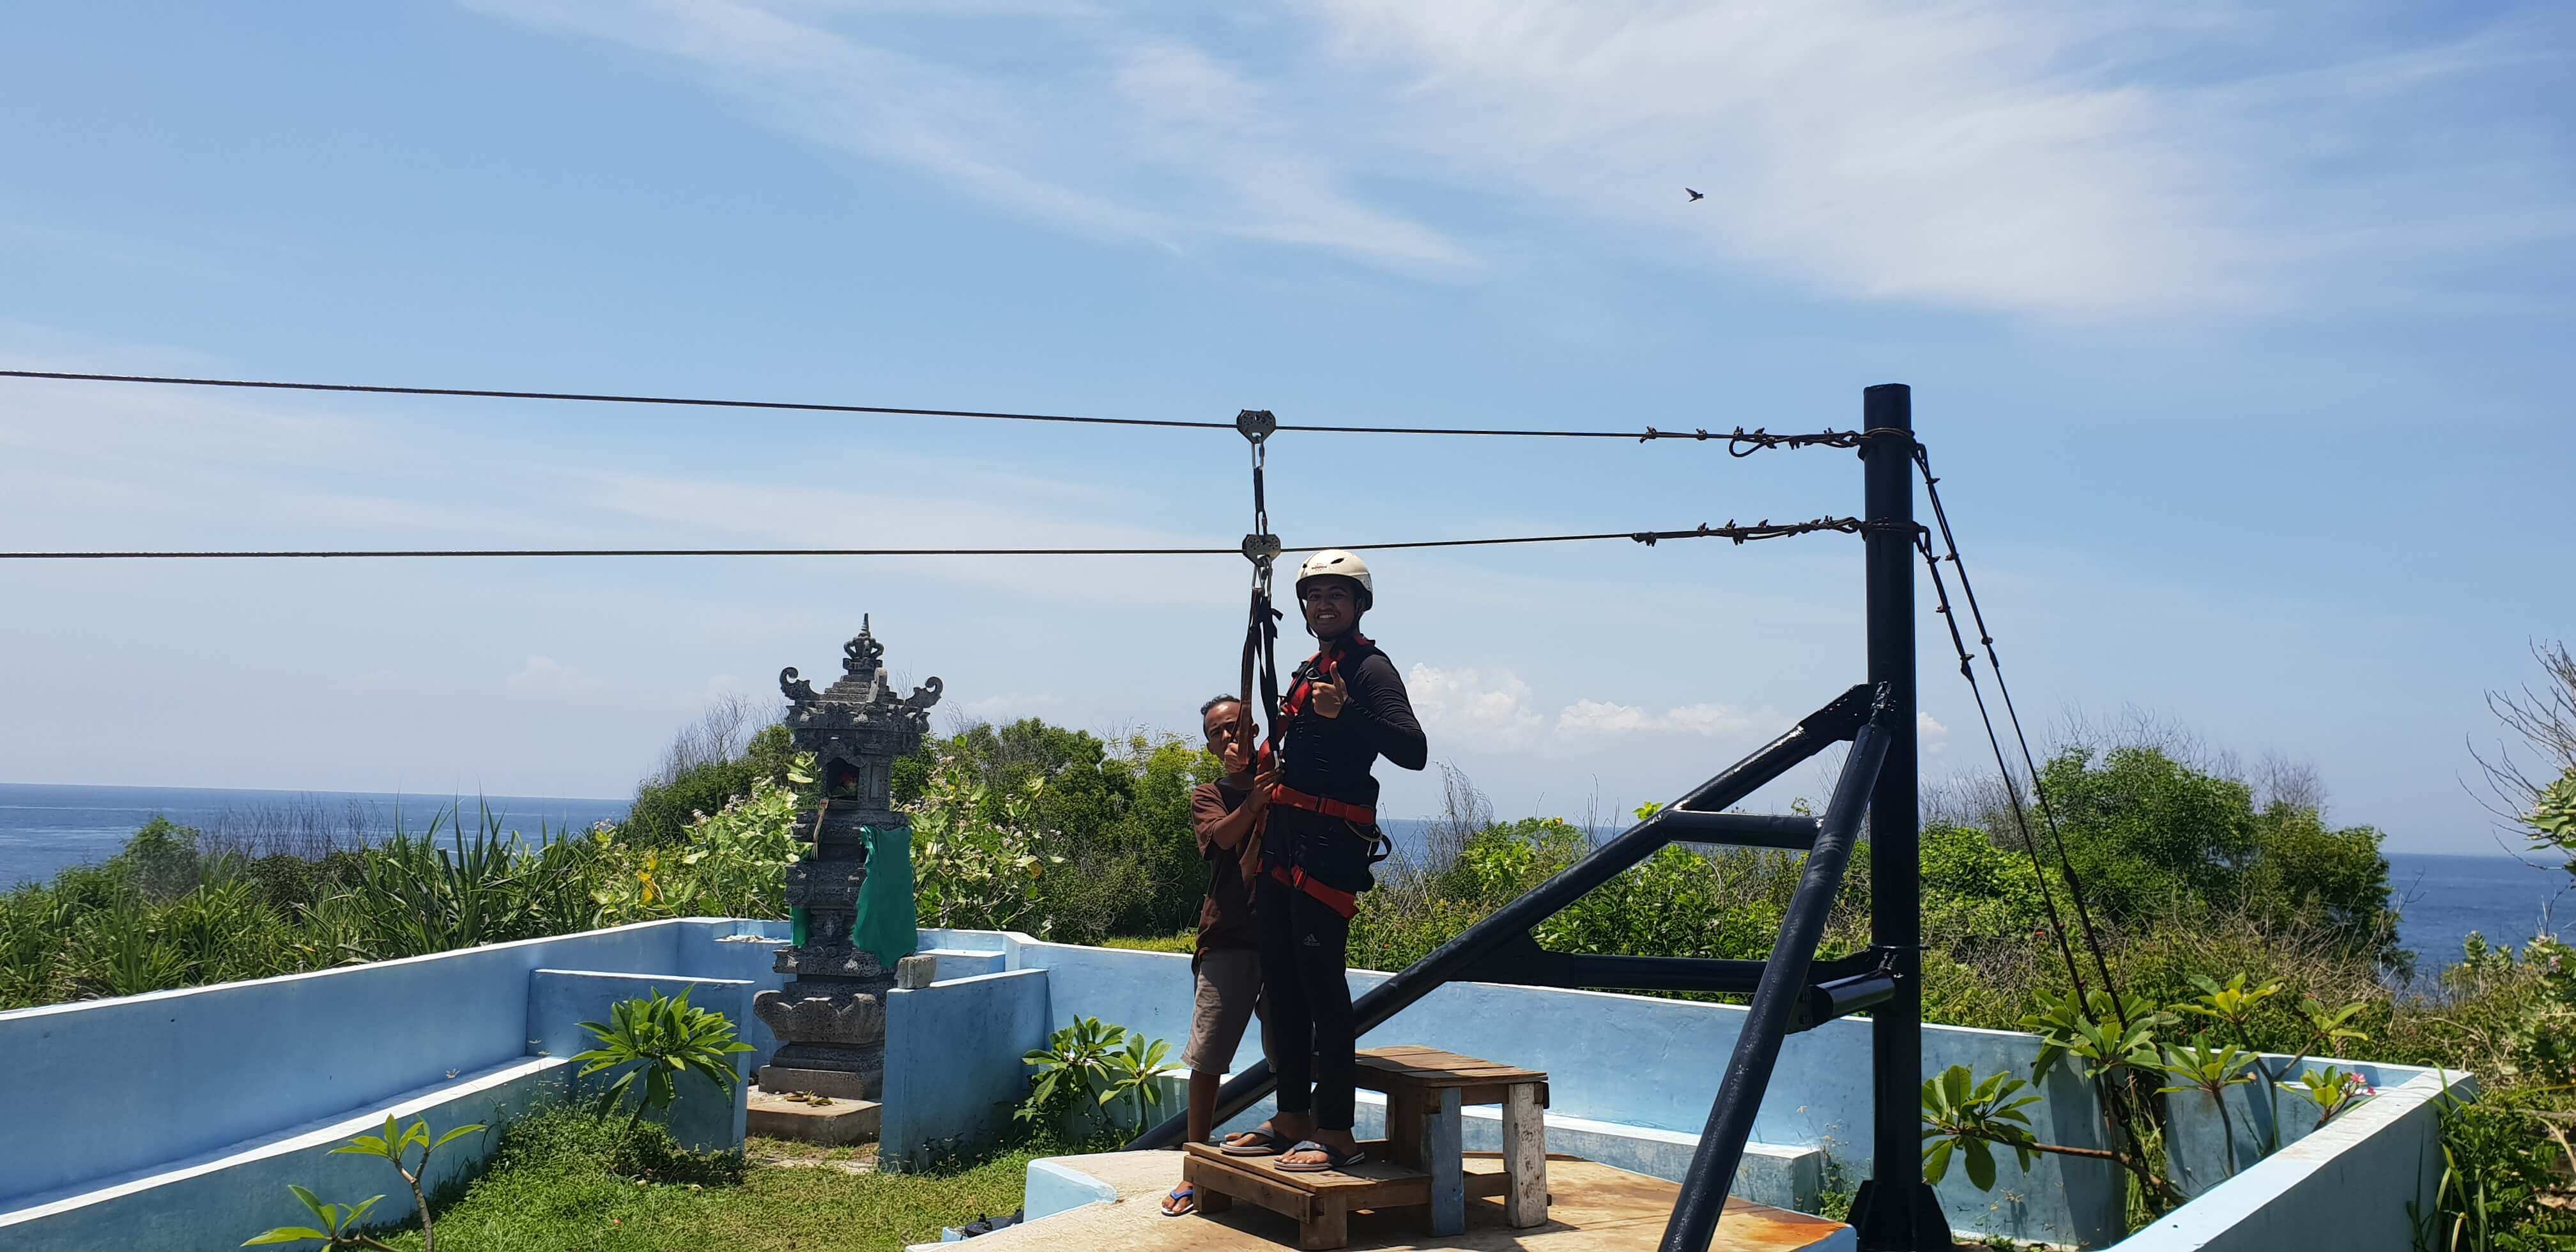 The Abyss Zipline in Nusa Ceningan is one of the best activities to do in your 10 day Bali itinerary